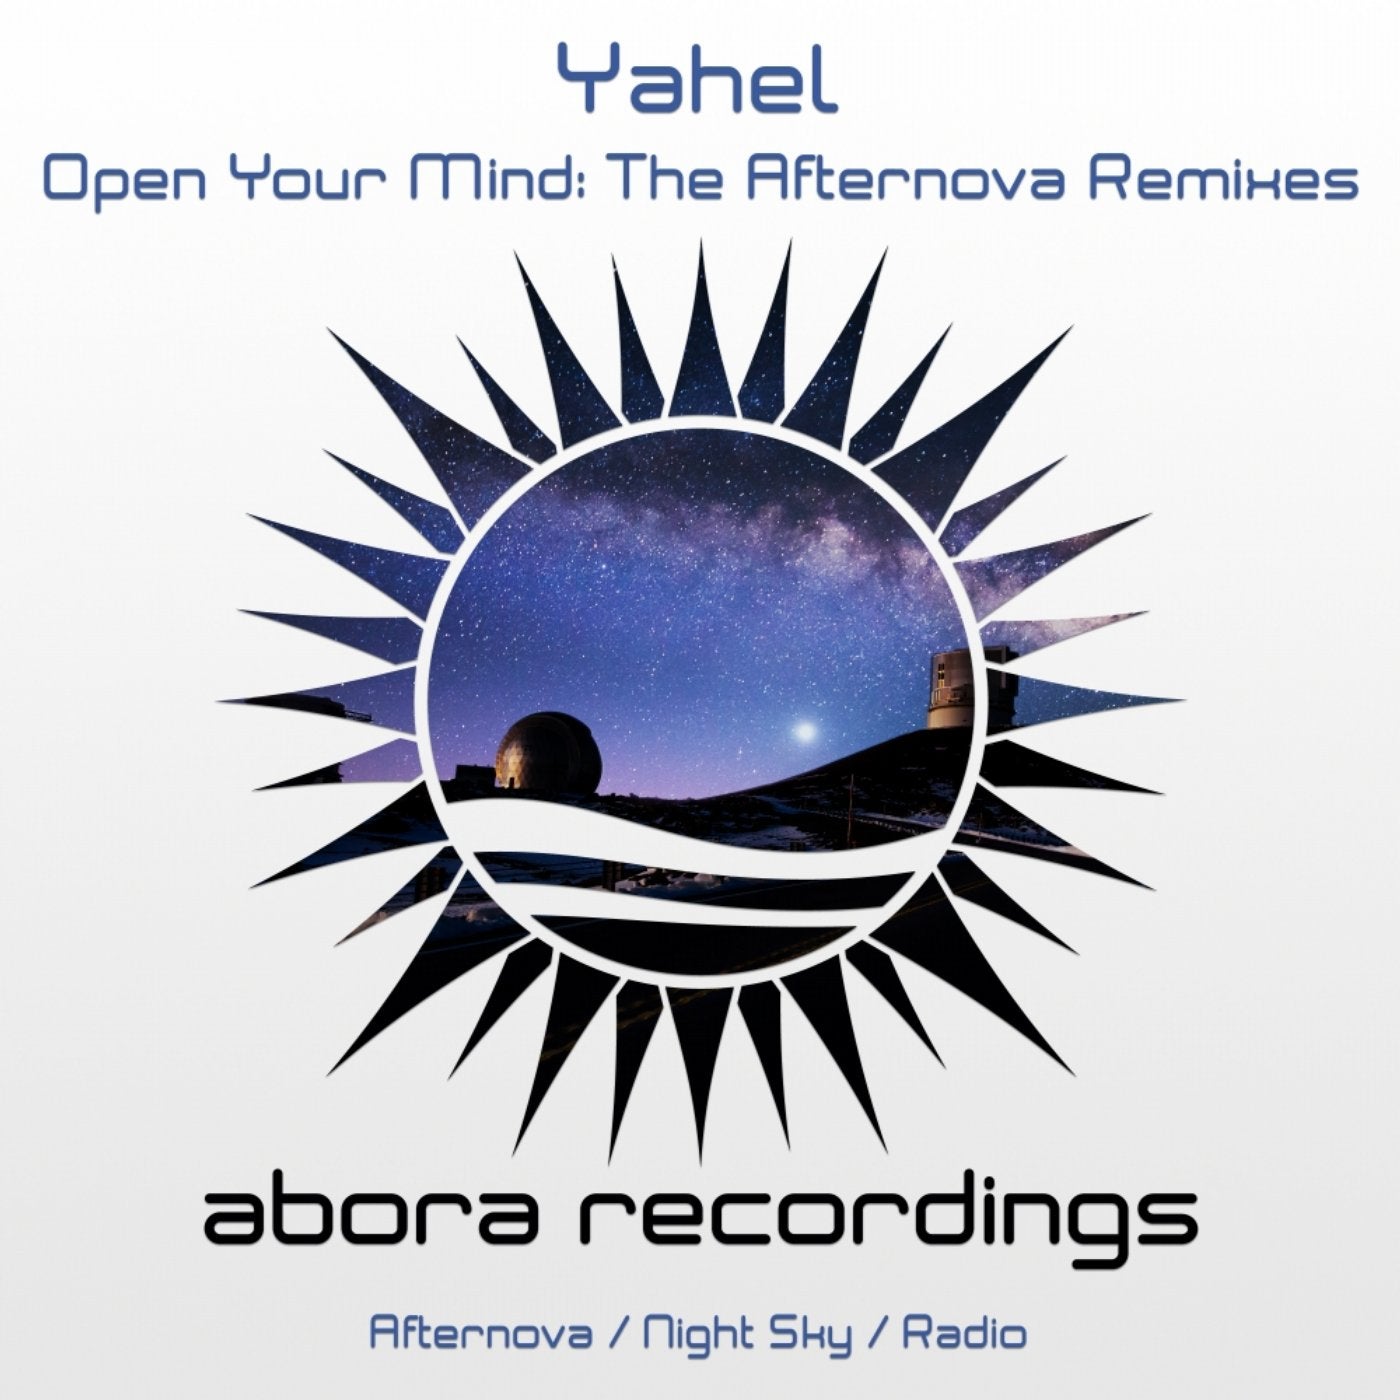 Open Your Mind: The Afternova Remixes